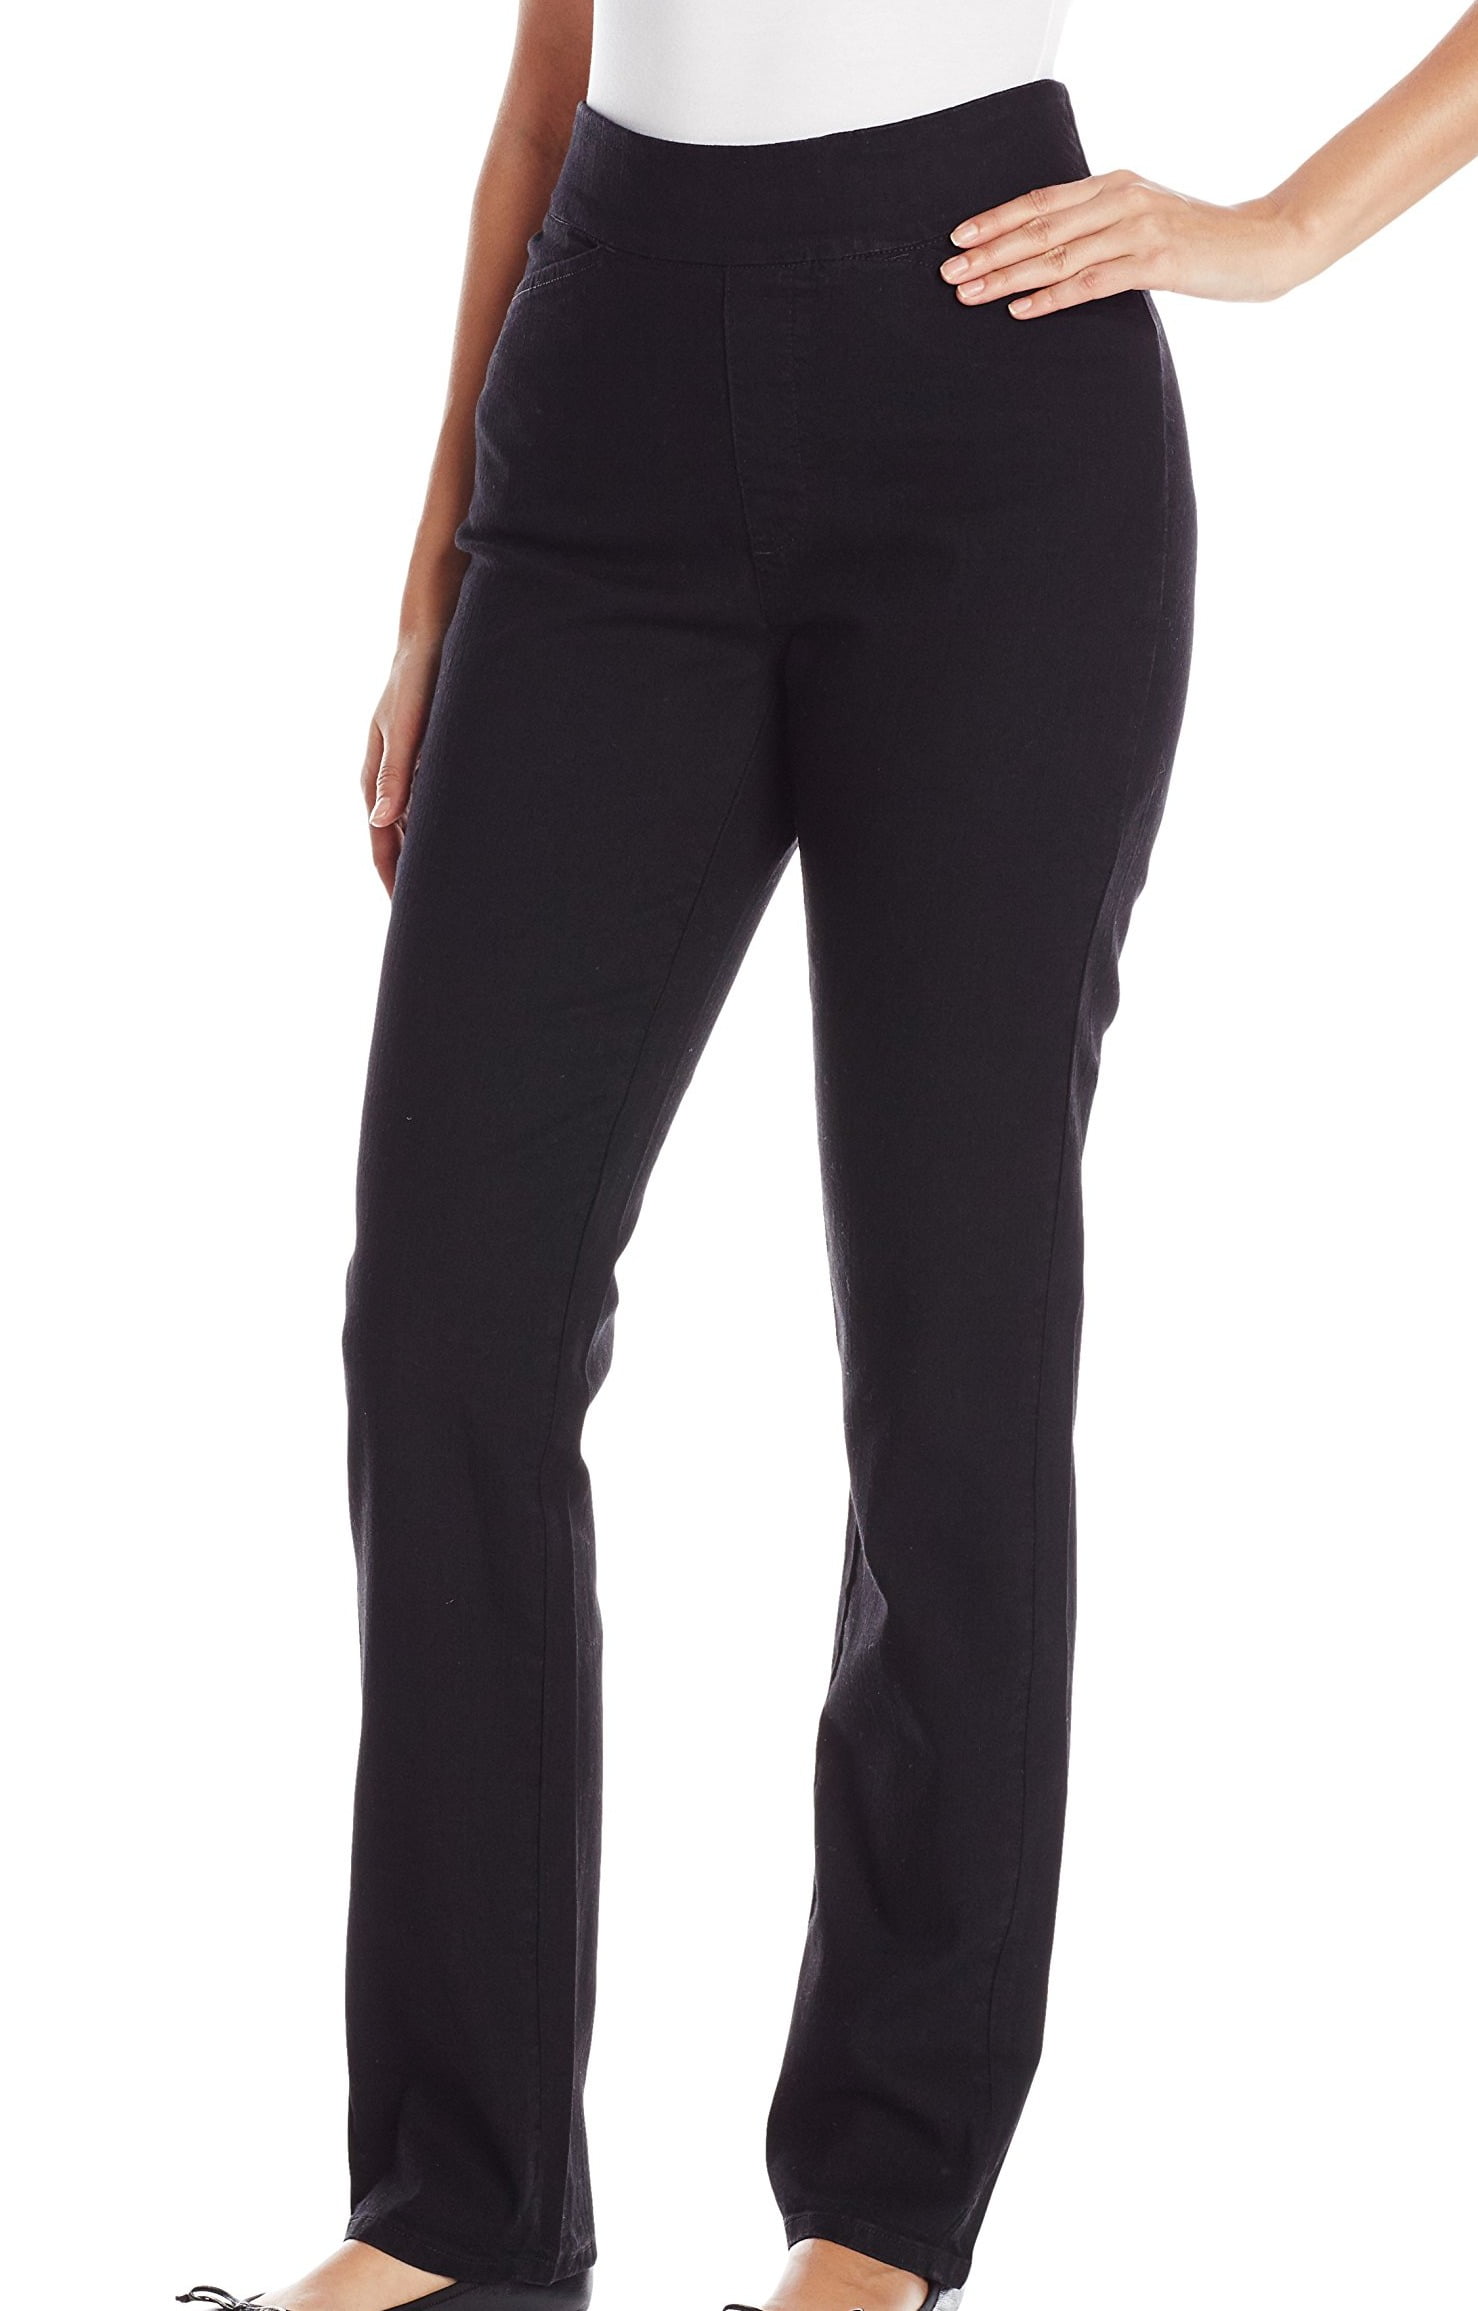 Chic Women's Easy Fit Elastic Waist Pull On Pant